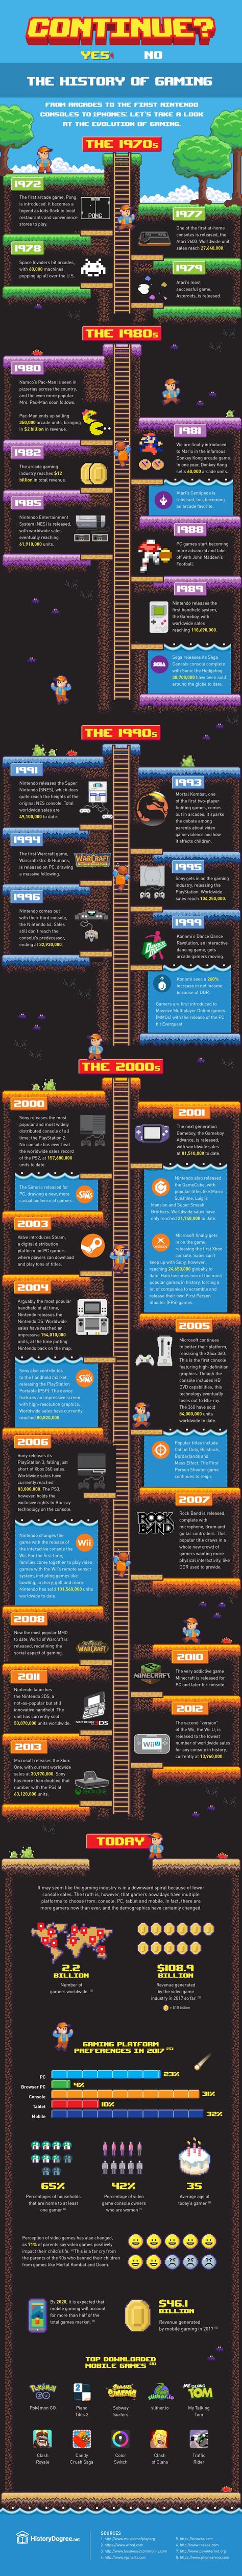 This one simple chart traces the entire history of video games from Pong to 2.2 billion gamers in a multi-billion industry that has aged beautifully, and inspired a digital world. Gaming Infographic, Computer Infographics, Gen Chem, Daily Infographic, Evolution Of Video Games, Interesting Infographics, Infographic Timeline, John Madden, History Of Video Games